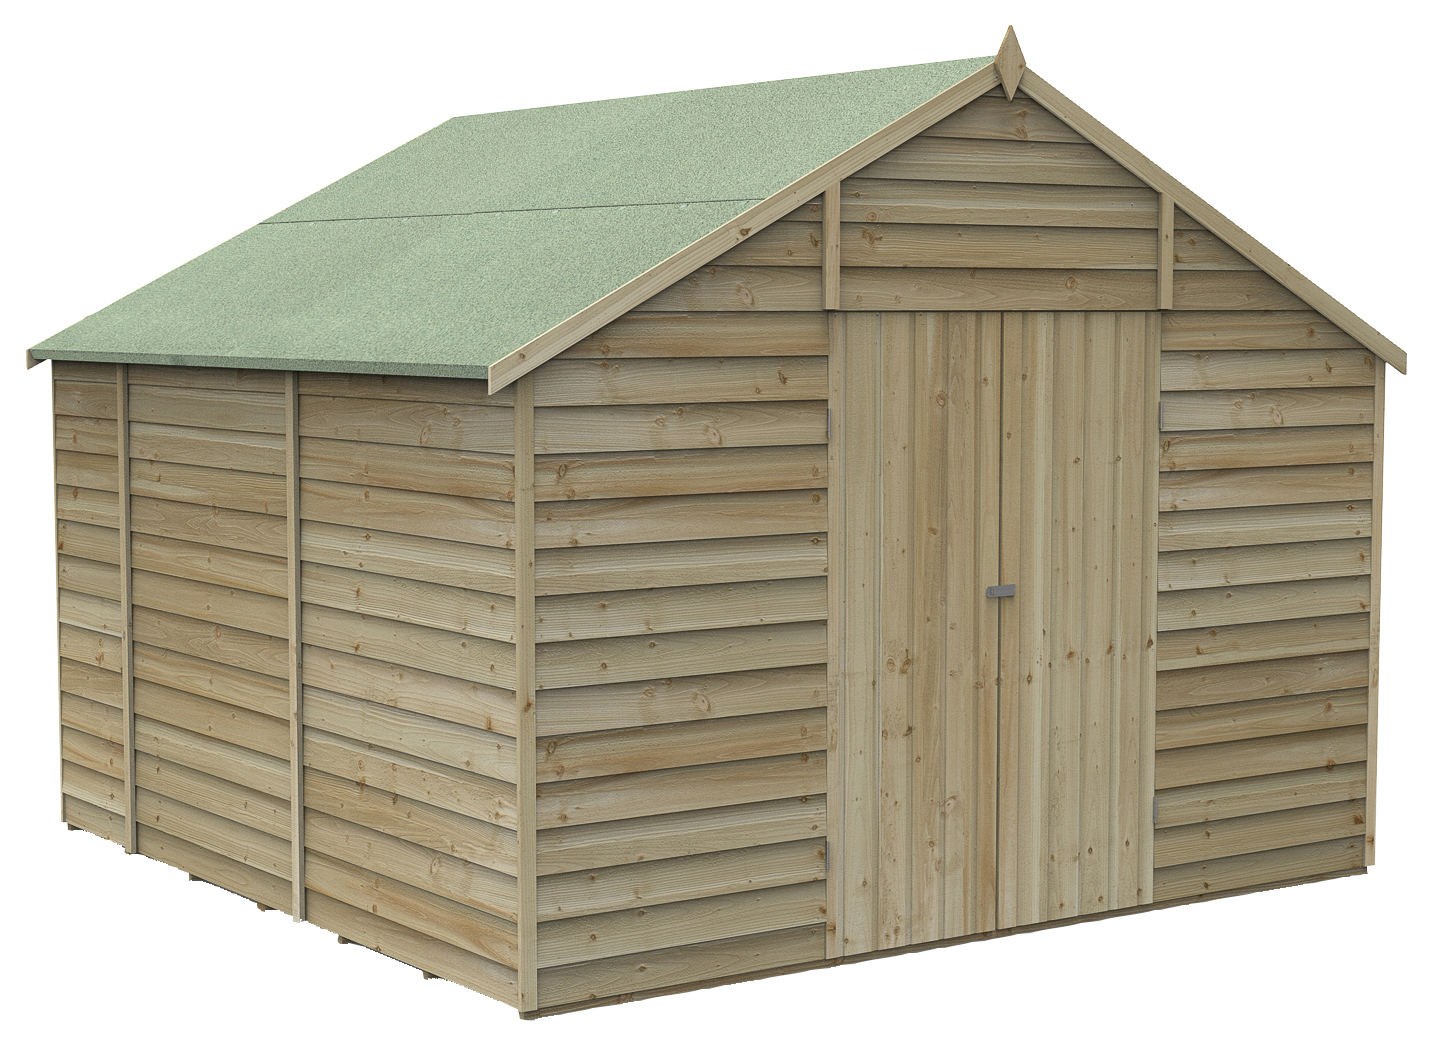 Image of Forest Garden 10 x 10ft 4Life Apex Overlap Pressure Treated Double Door Windowless Shed with Base